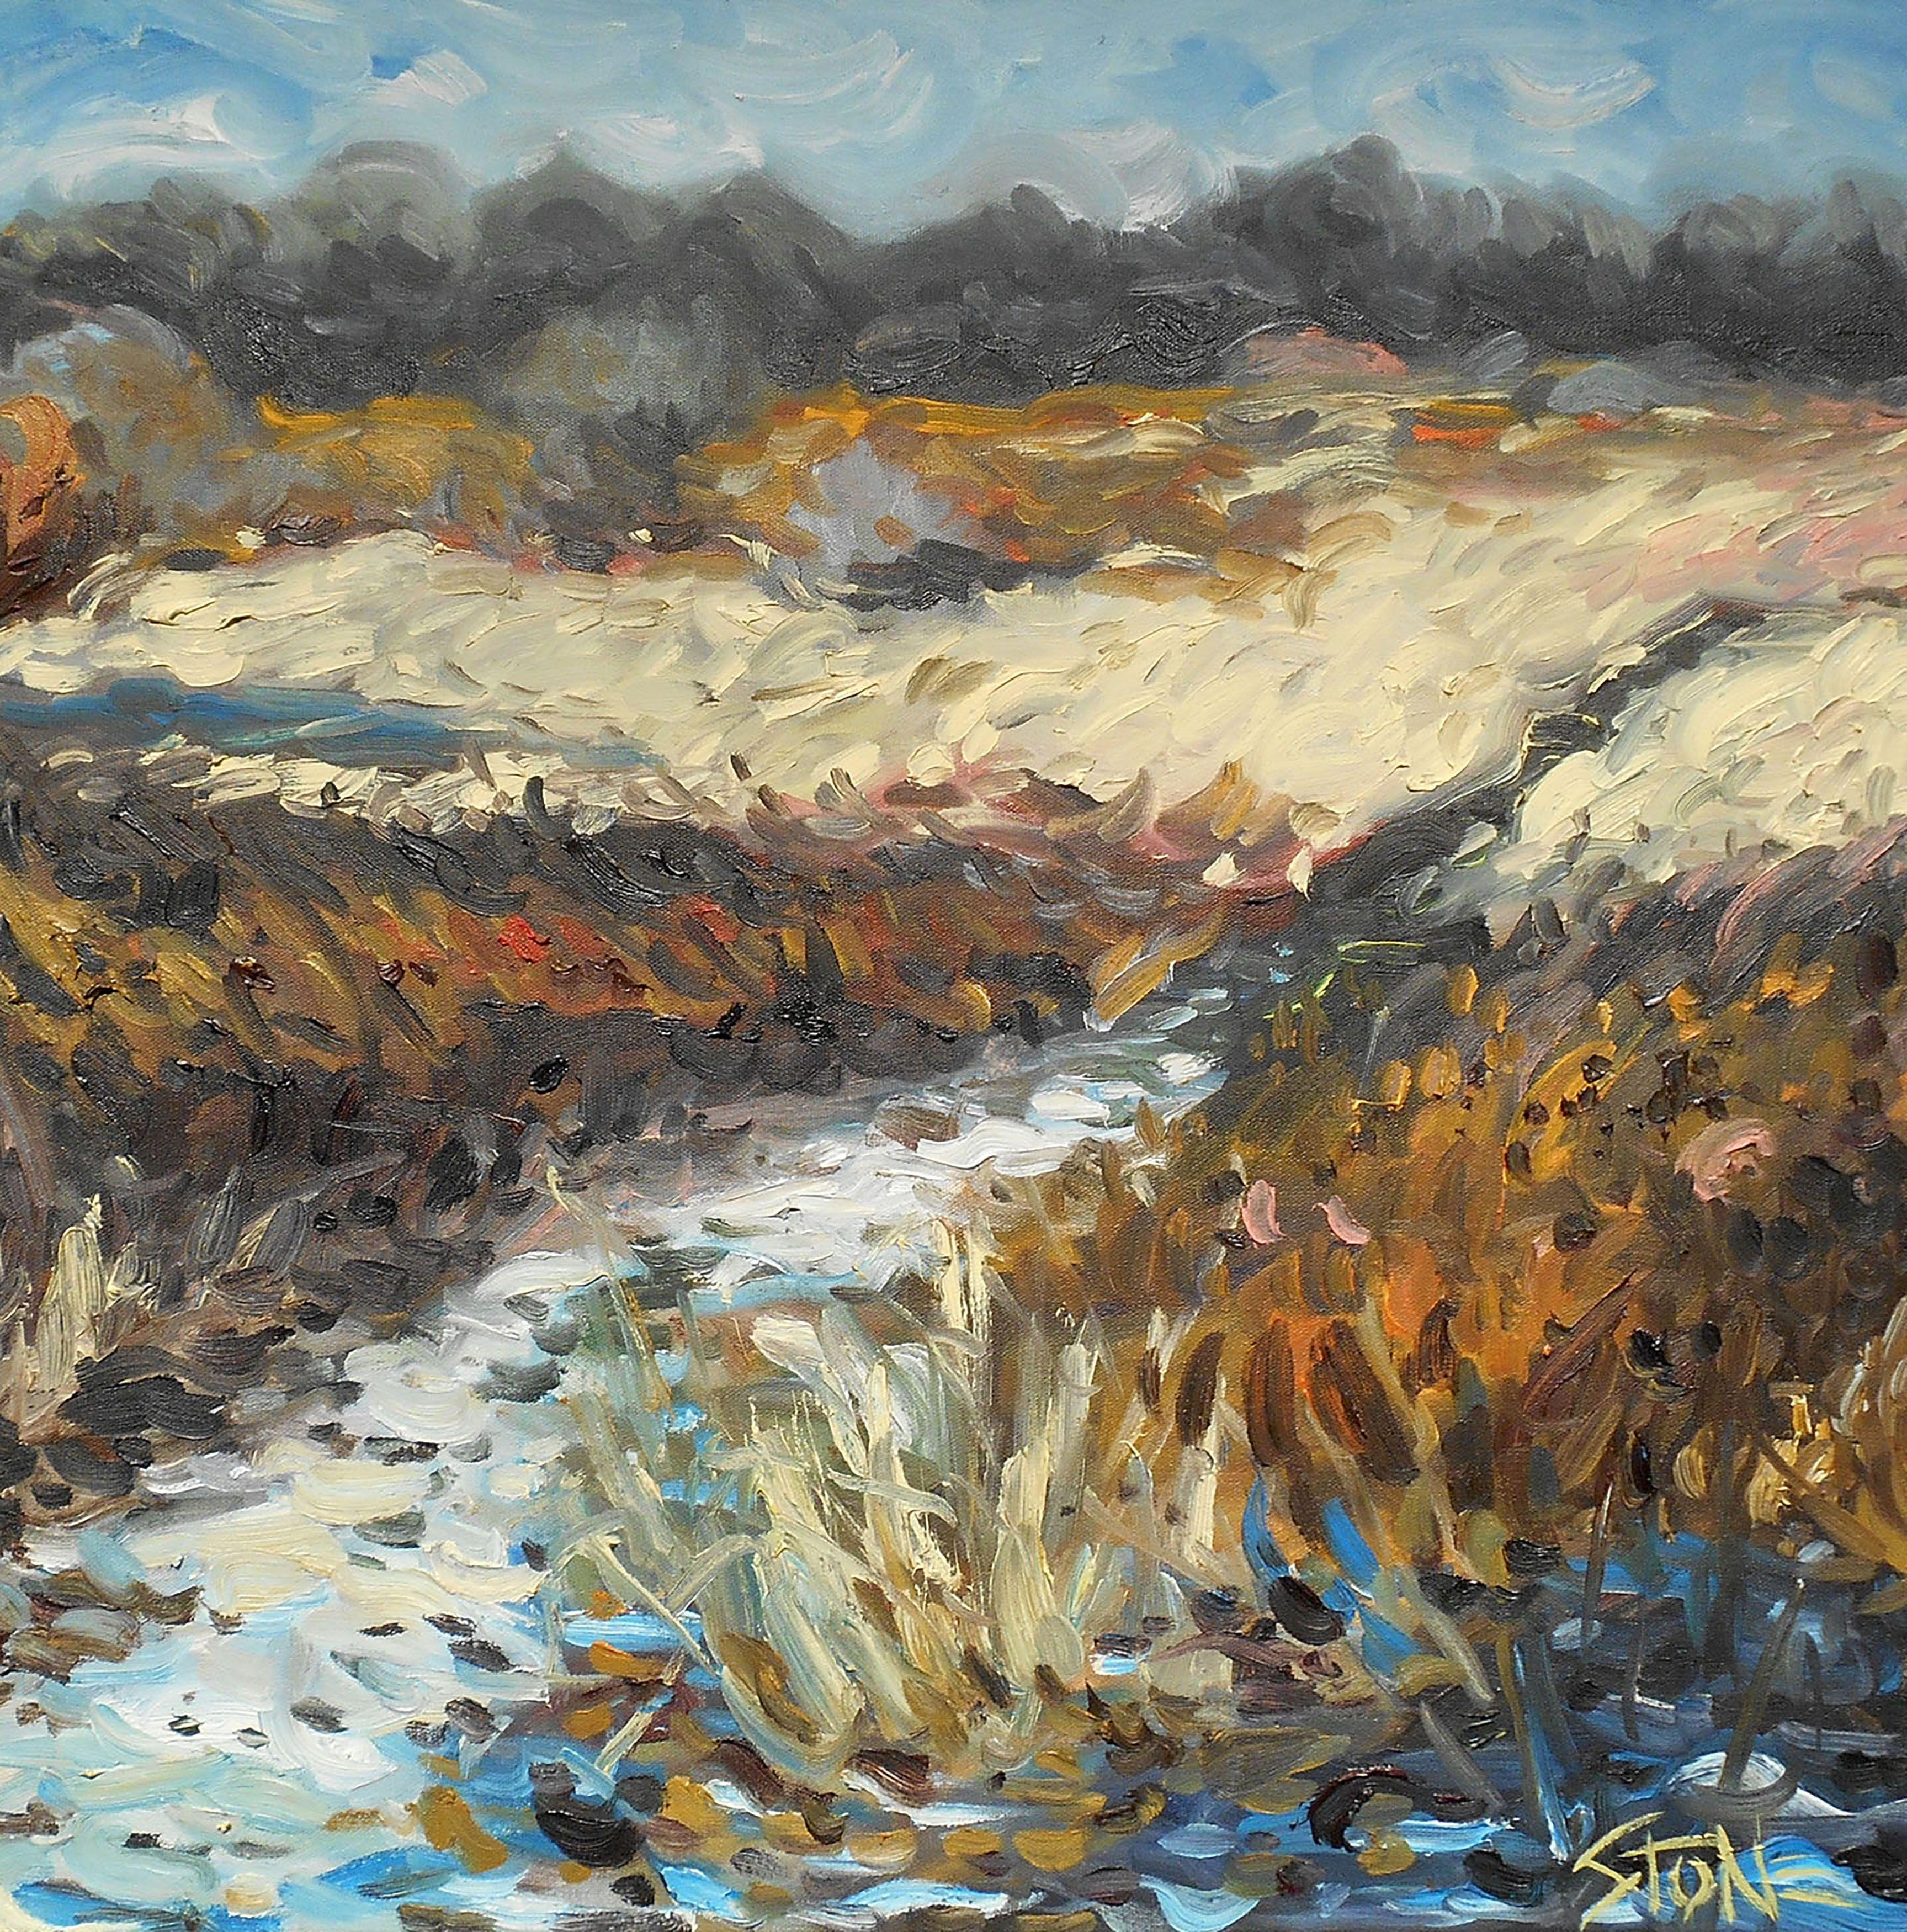 Plein air painting on a bitterly cold morning in the forest preserve. :: Painting :: Impressionist :: This piece comes with an official certificate of authenticity signed by the artist :: Ready to Hang: Yes :: Signed: No ::  :: Canvas :: Diagonal ::